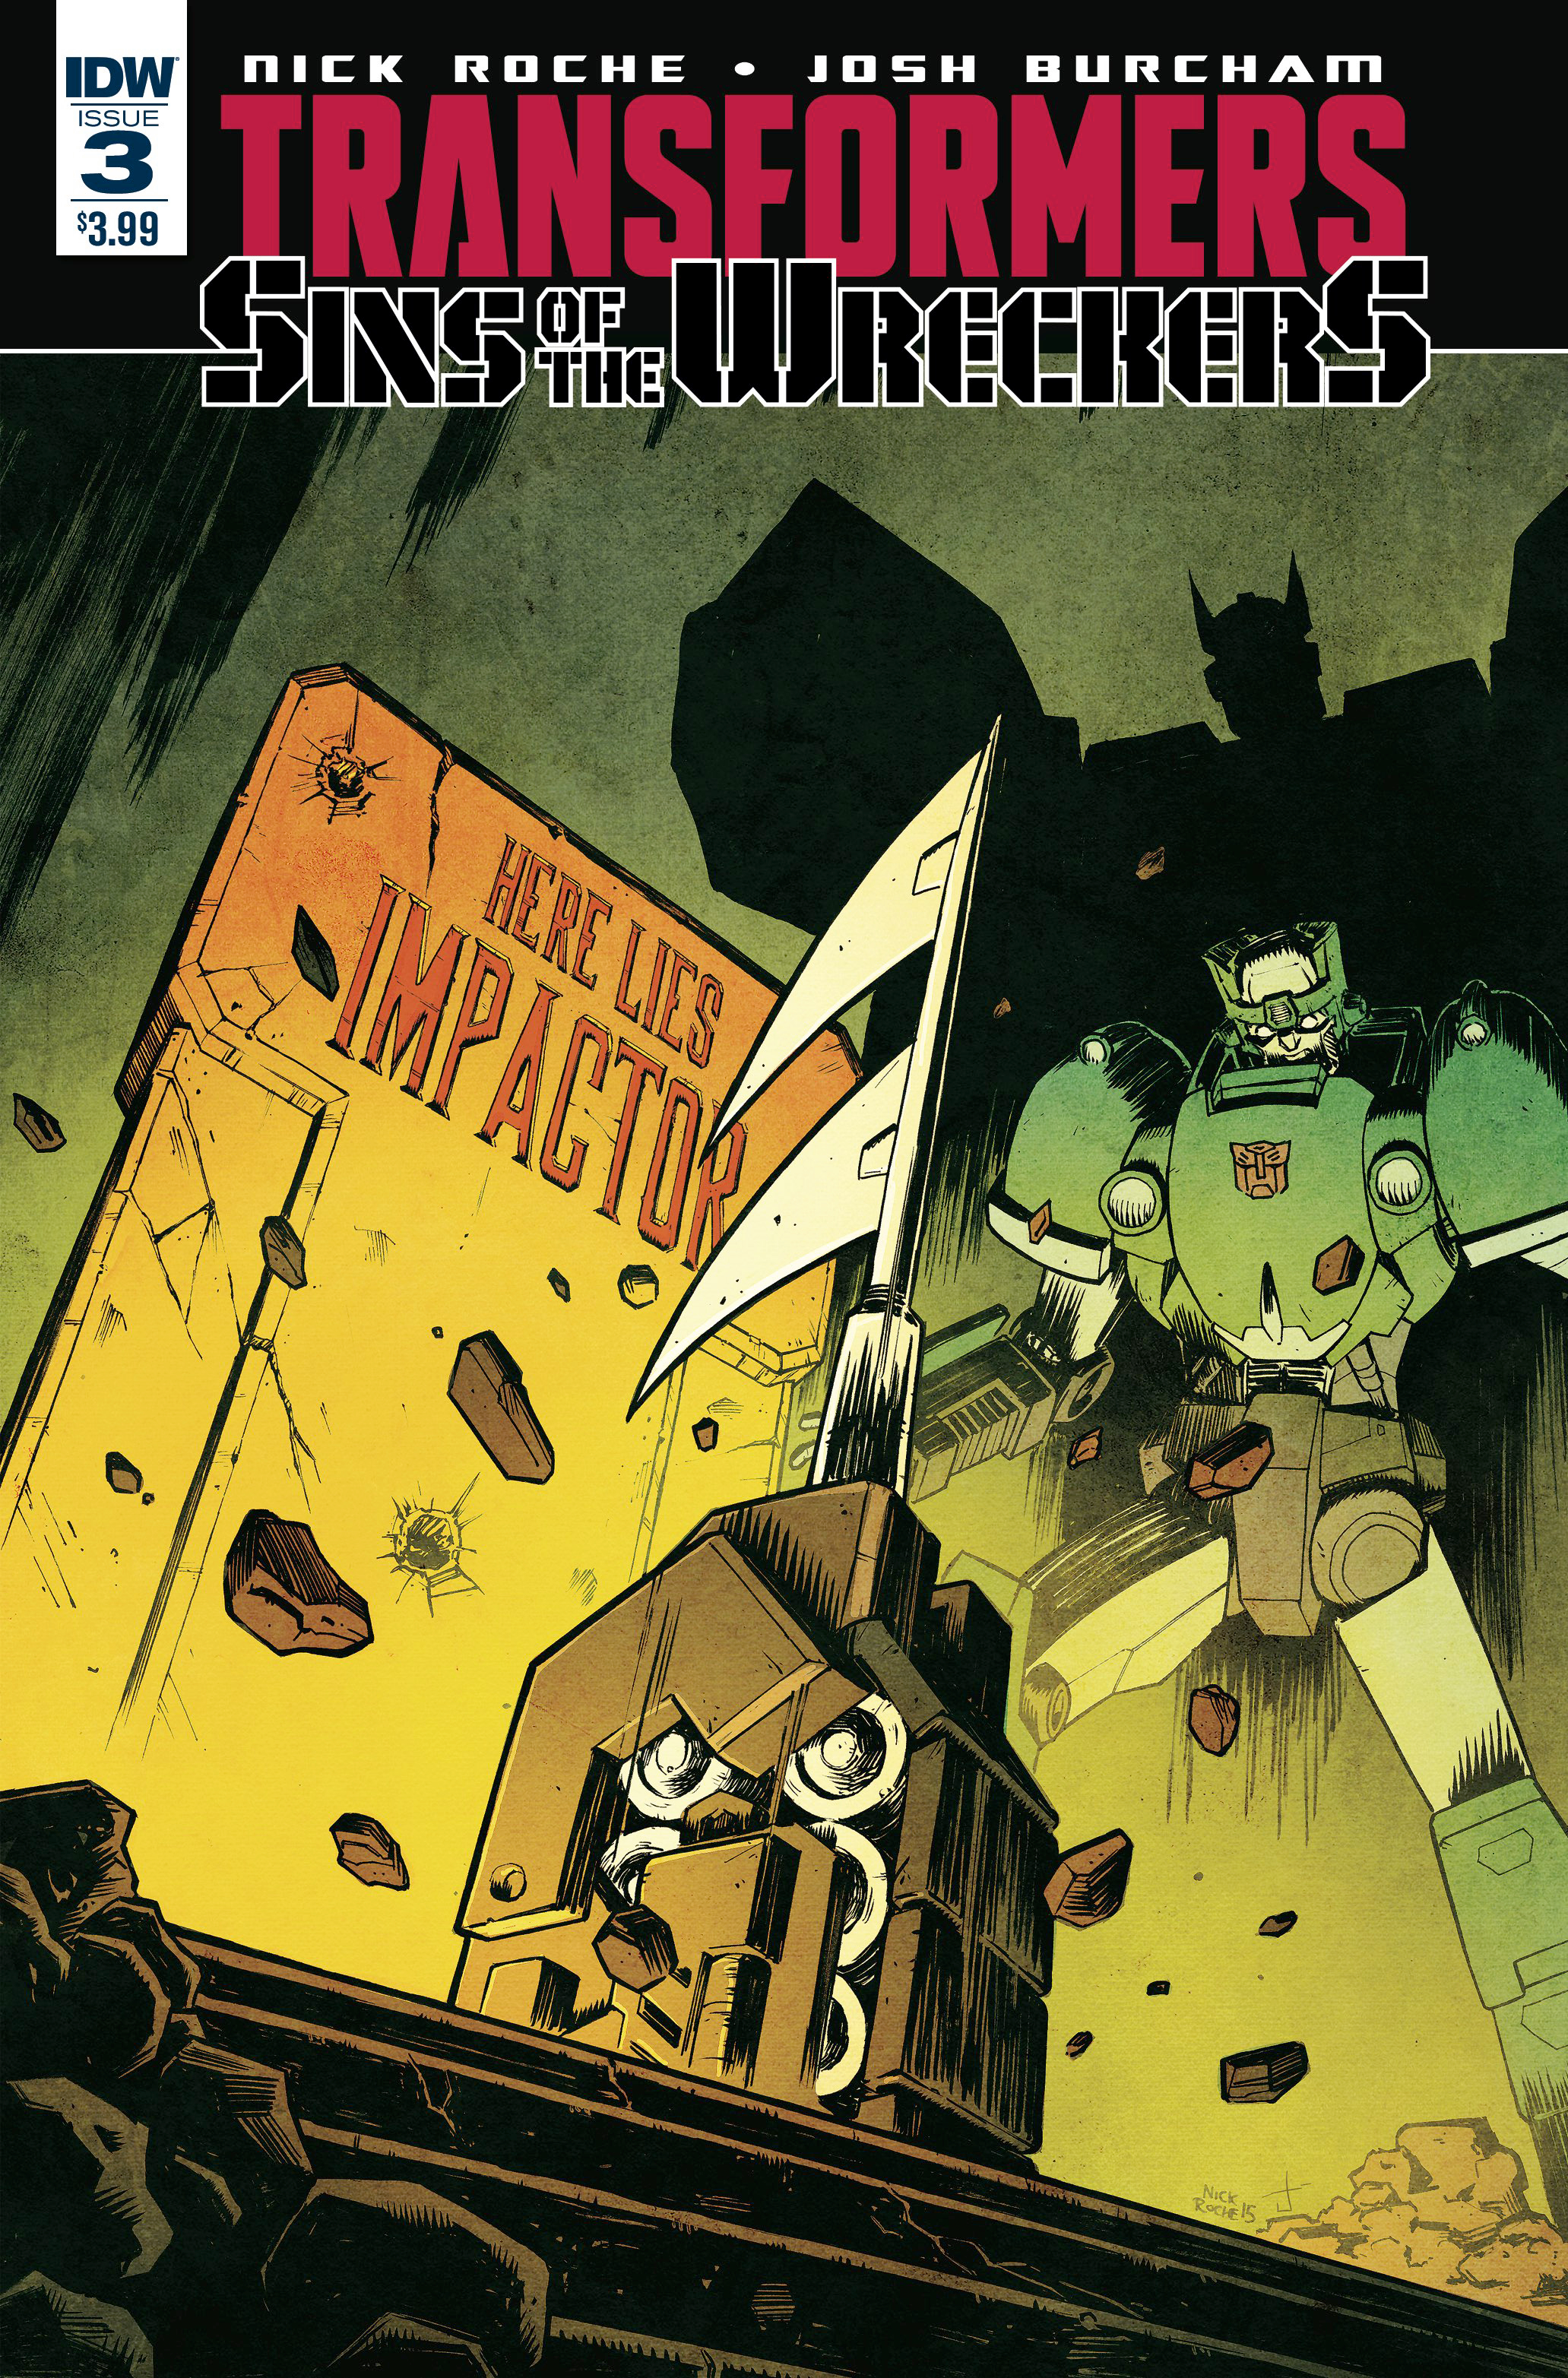 TRANSFORMERS SINS OF WRECKERS #3 (OF 5)